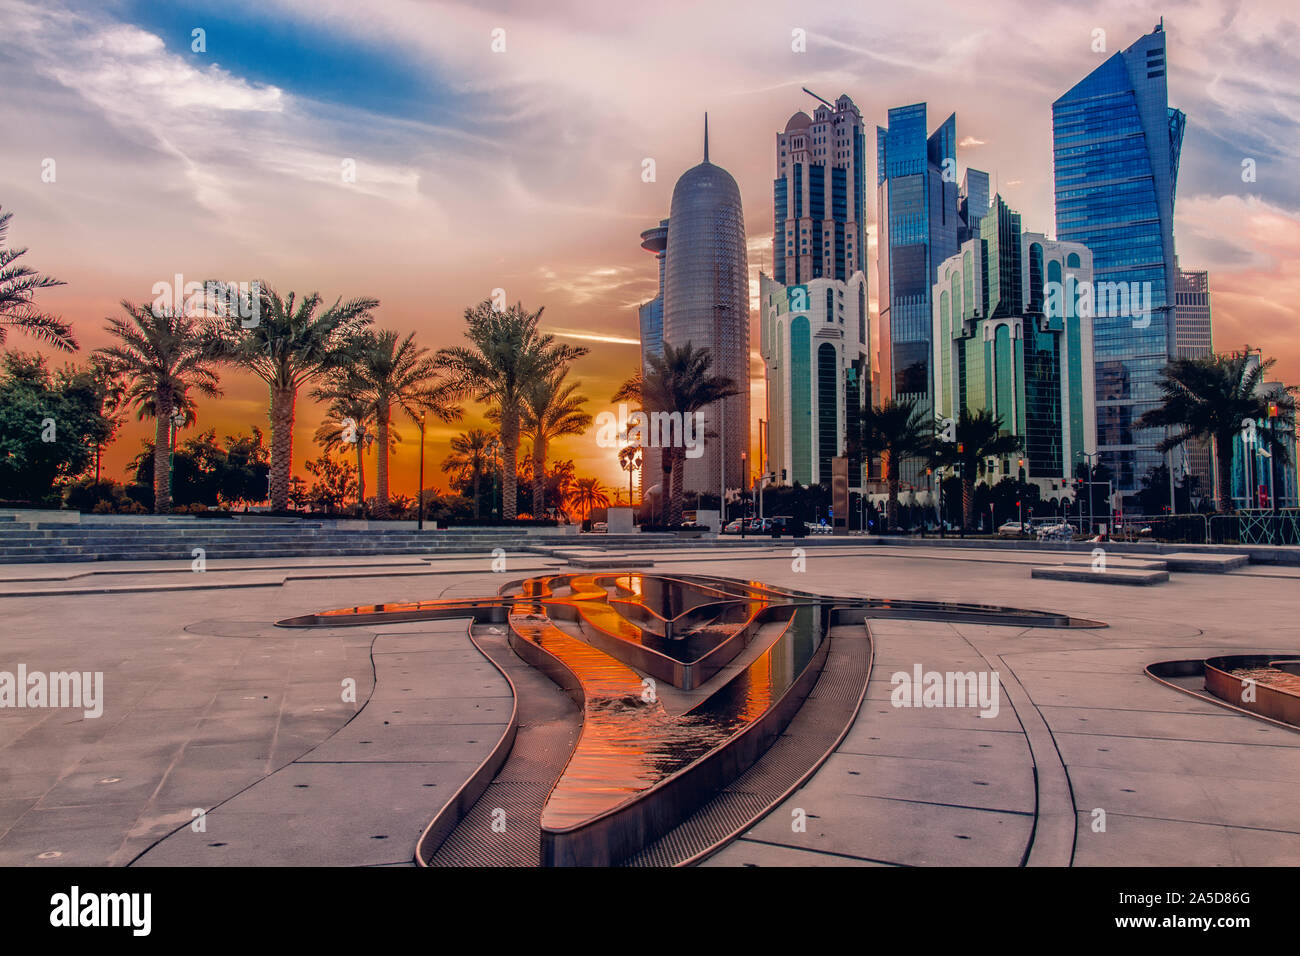 Doha view at sunset time Alamy